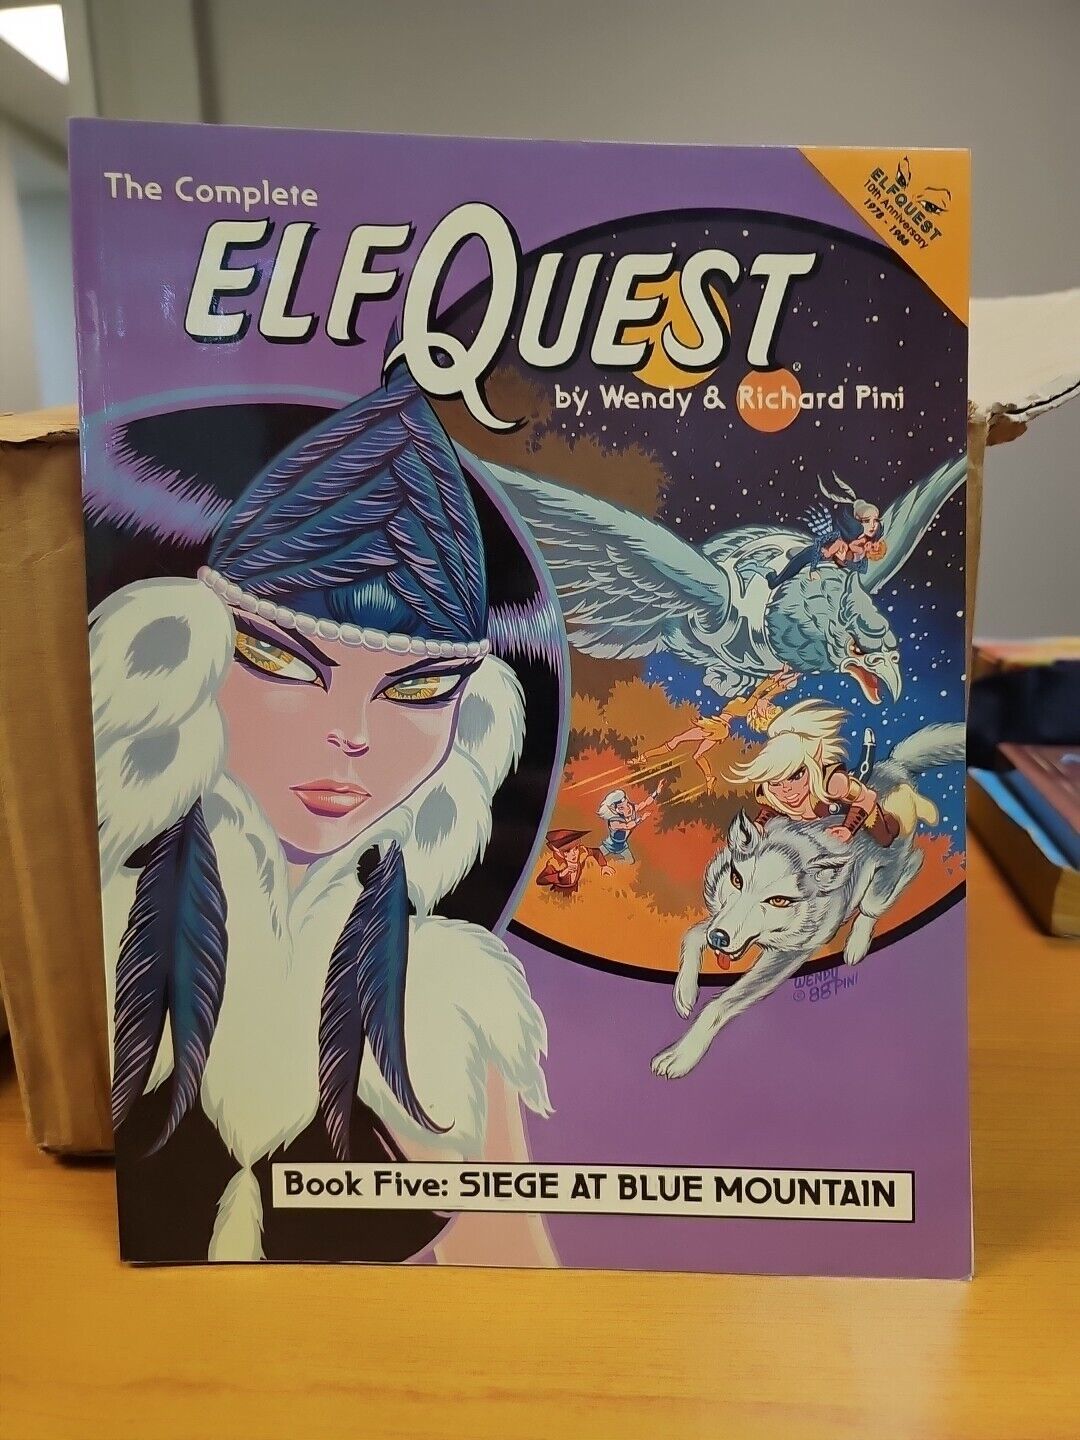 The Complete Elfquest Book Five: Siege At Blue Mountain